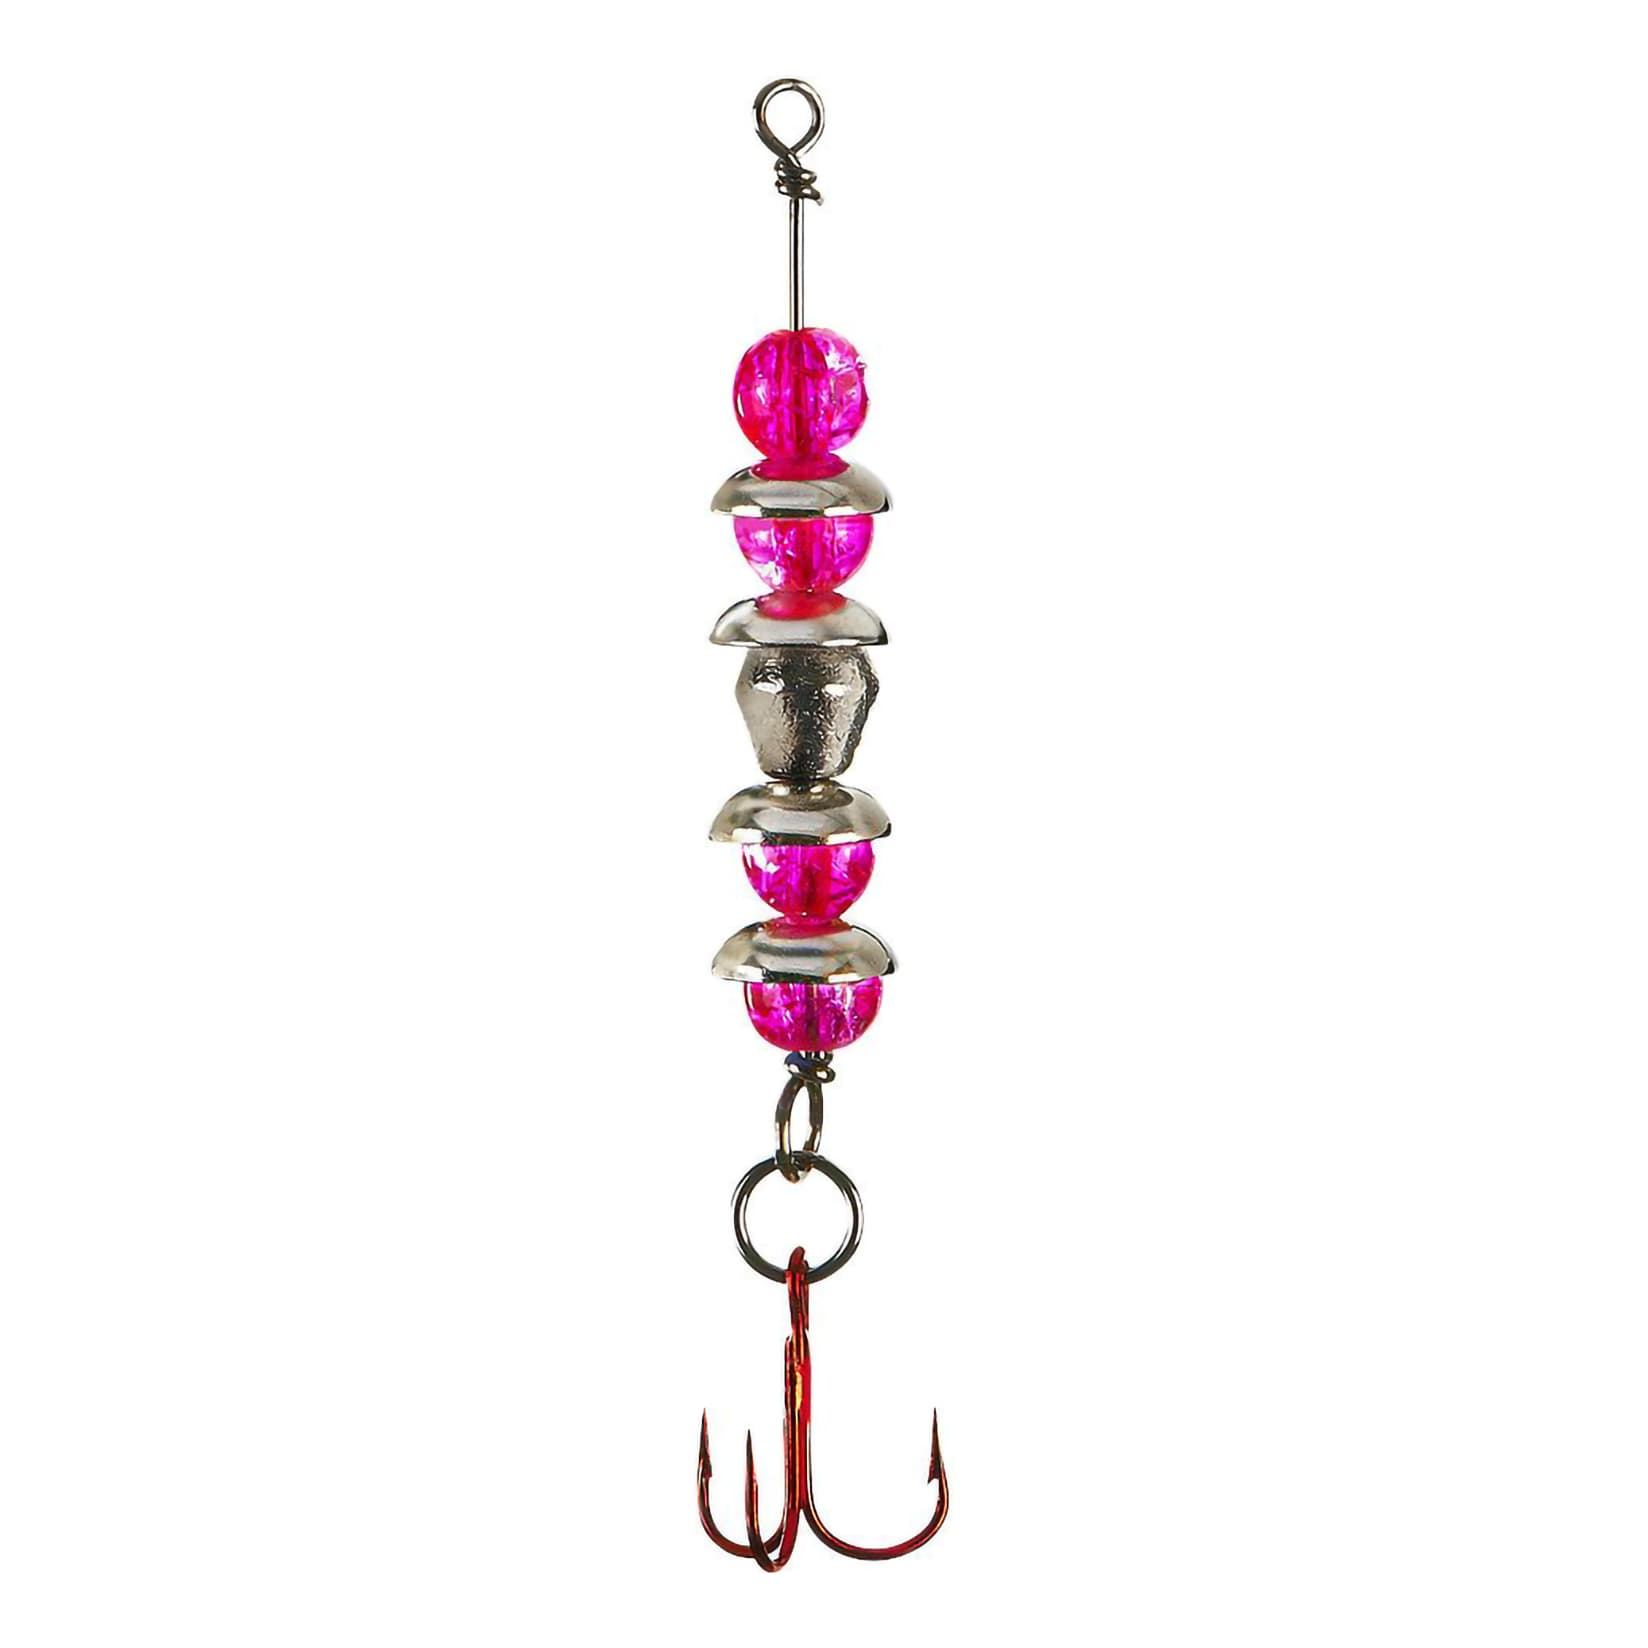 Lindy Ice Wally Talker - Pink Glass - 1/8 oz.